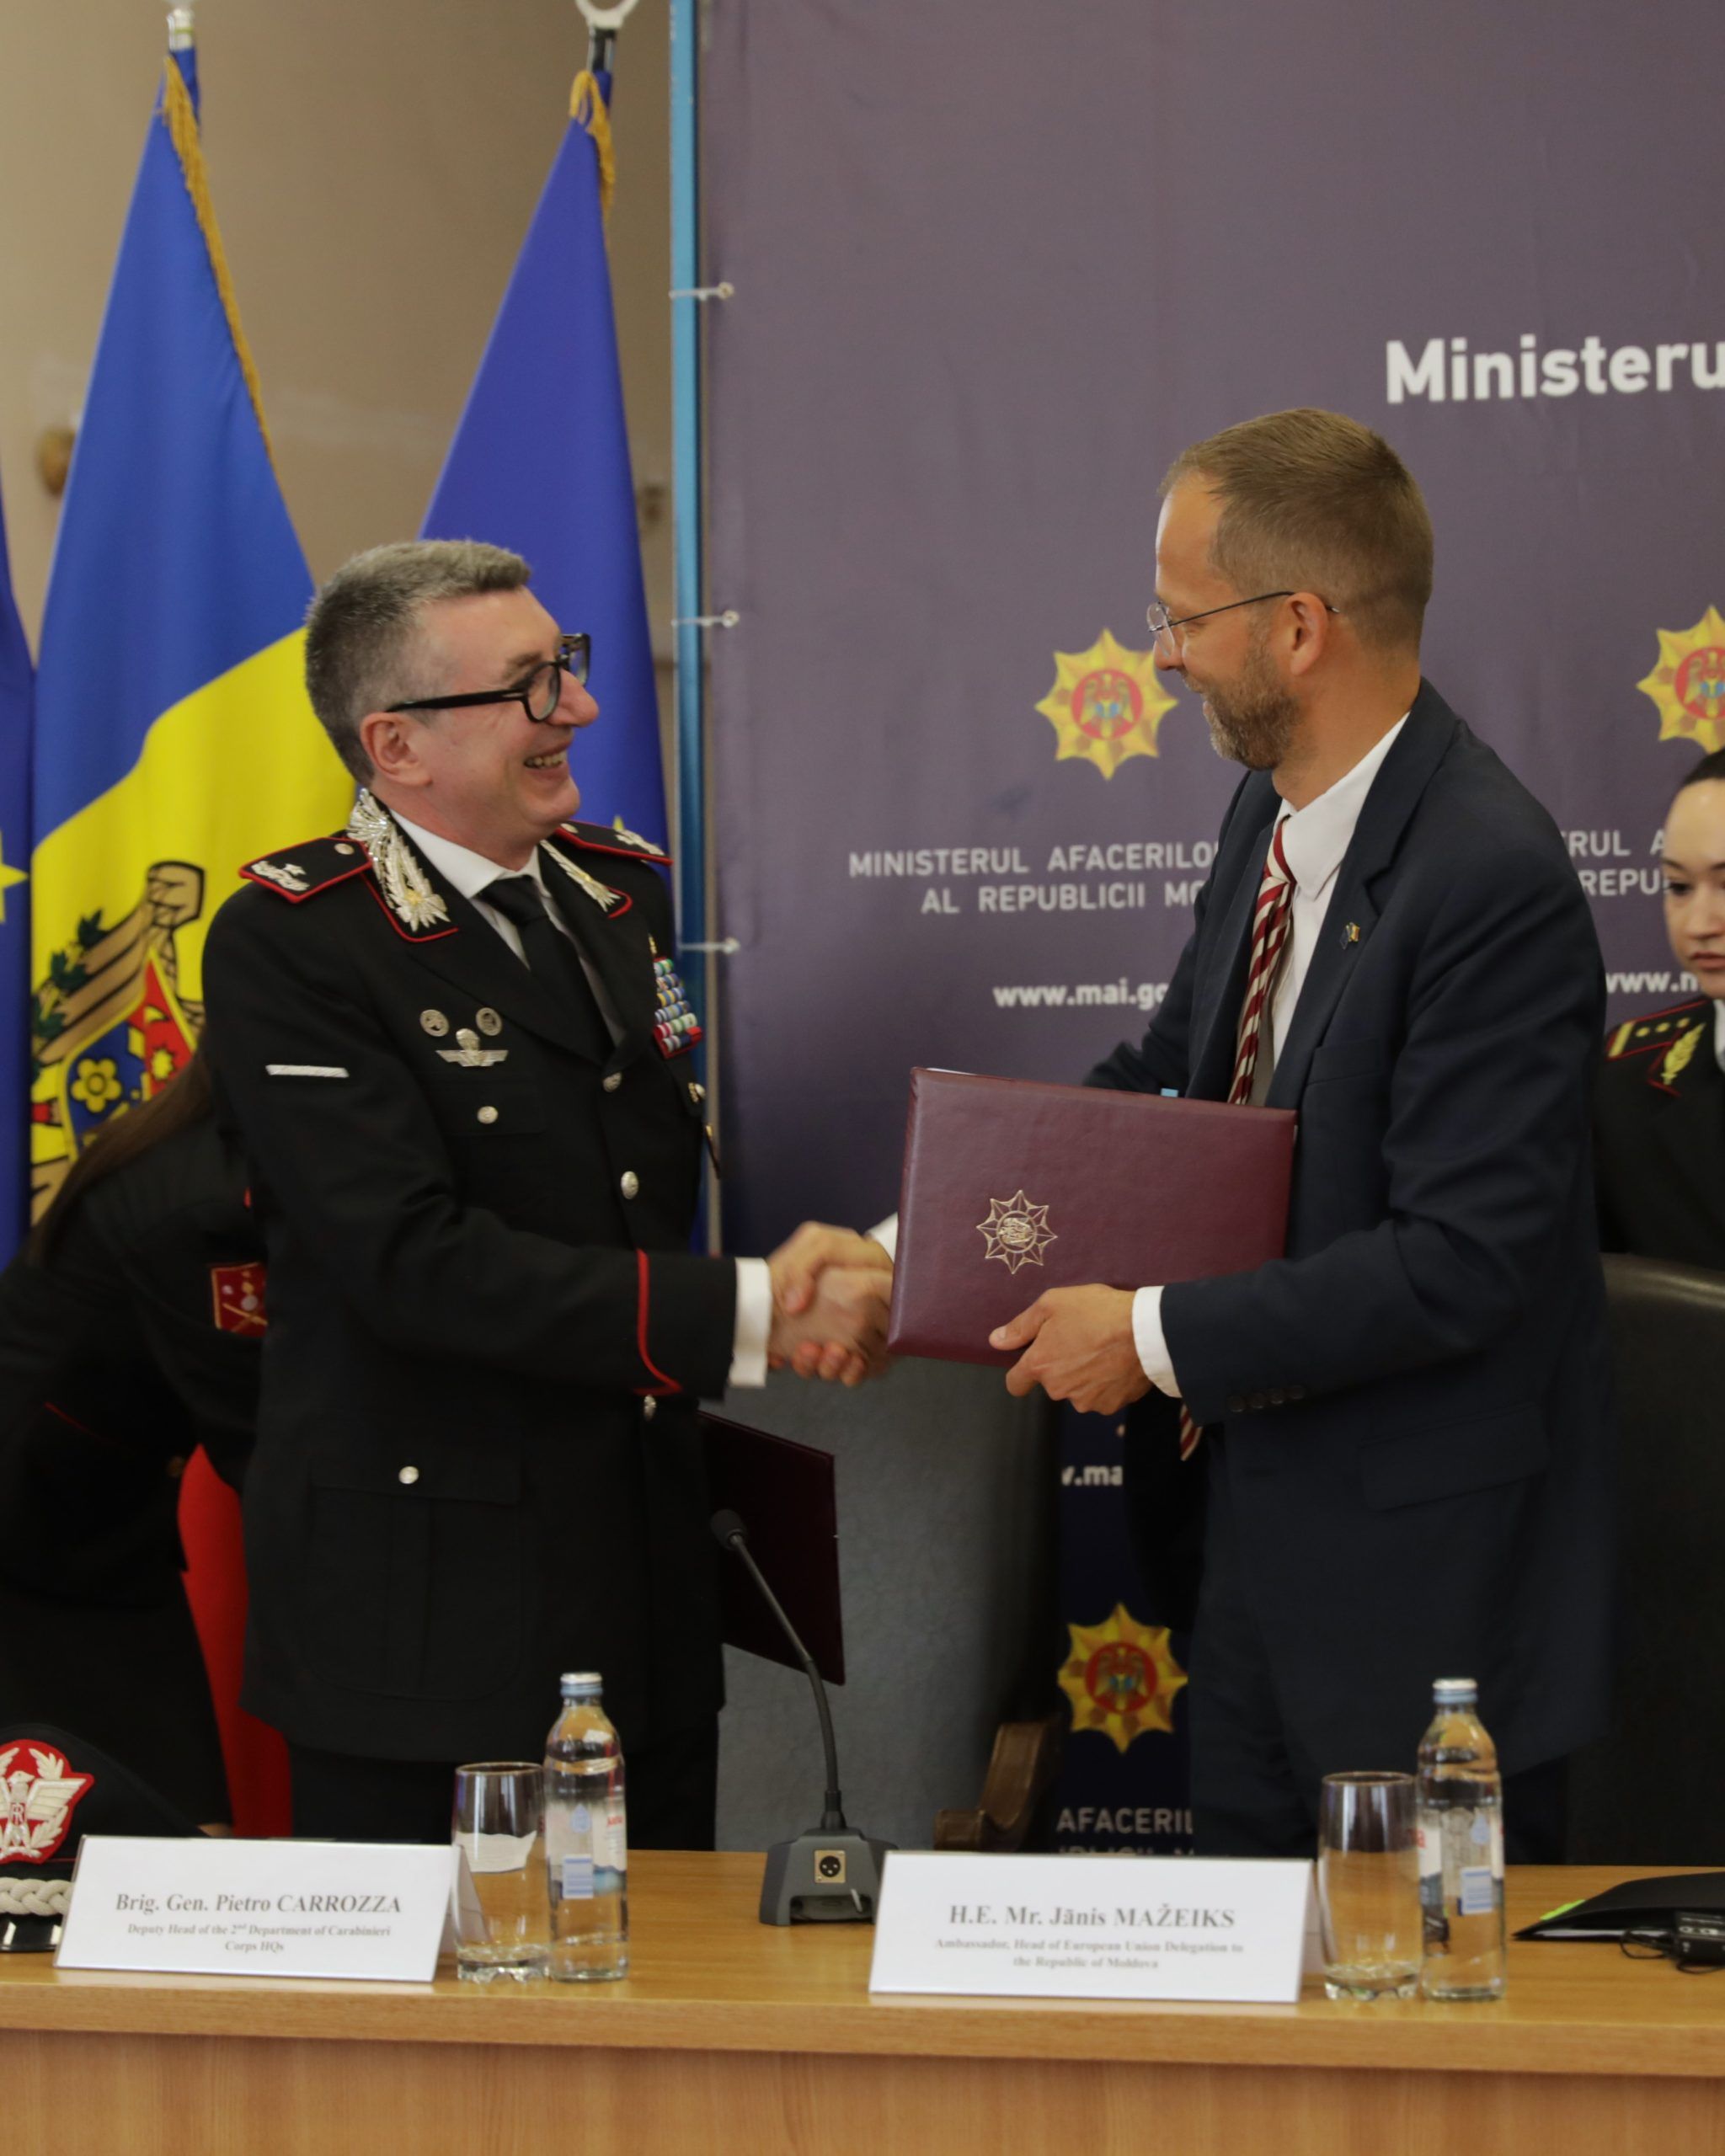 European Union provides support for strengthening the capacities of law enforcement agencies in the Republic of Moldova to increase citizens' safety